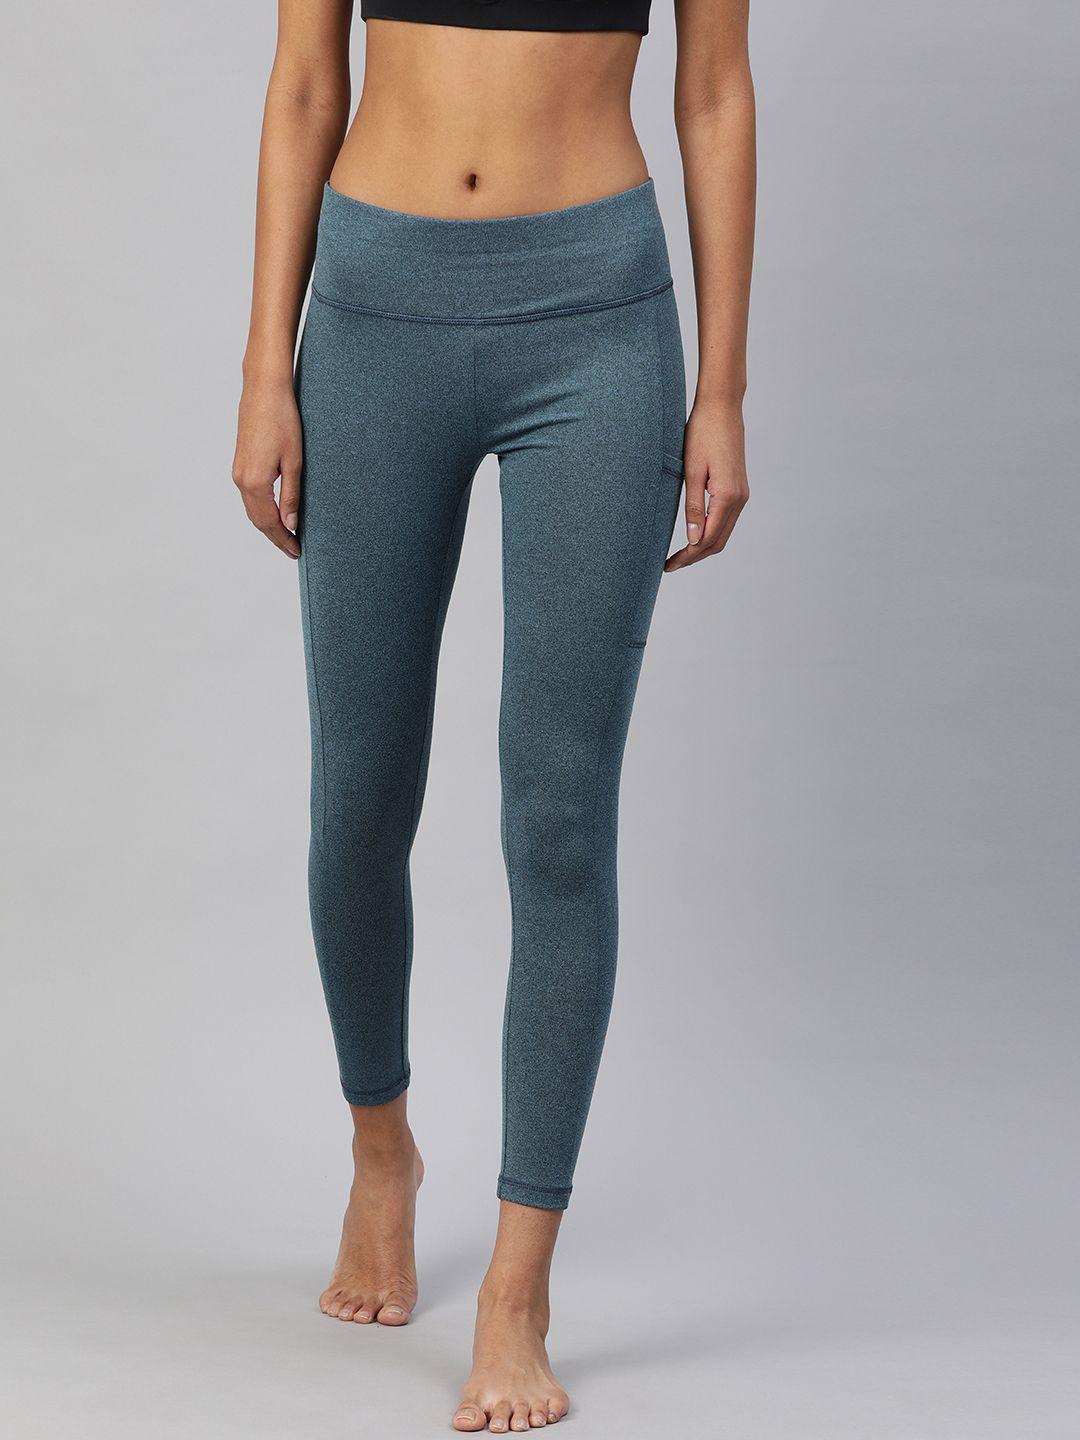 van-heusen-women-blue-solid-yoga-spirit-cropped-tights-with-print-detail